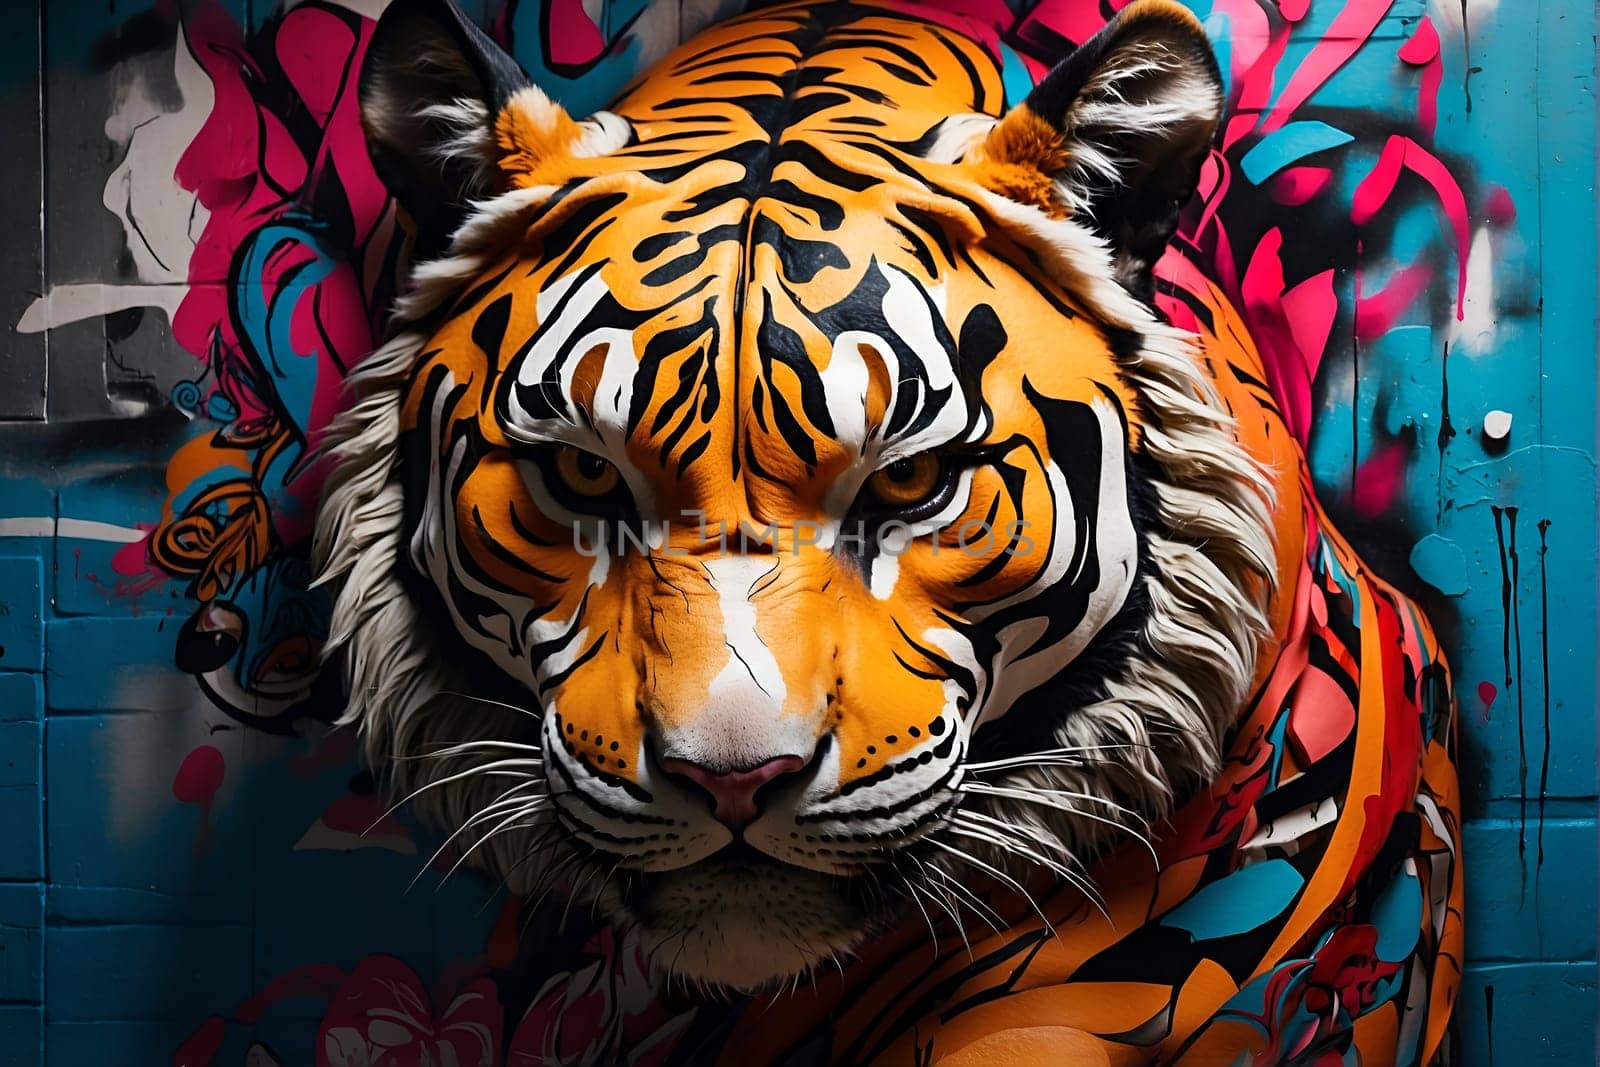 A striking, lifelike depiction of a large tiger painted on the side of a building, capturing the beauty and strength of this iconic wild animal.